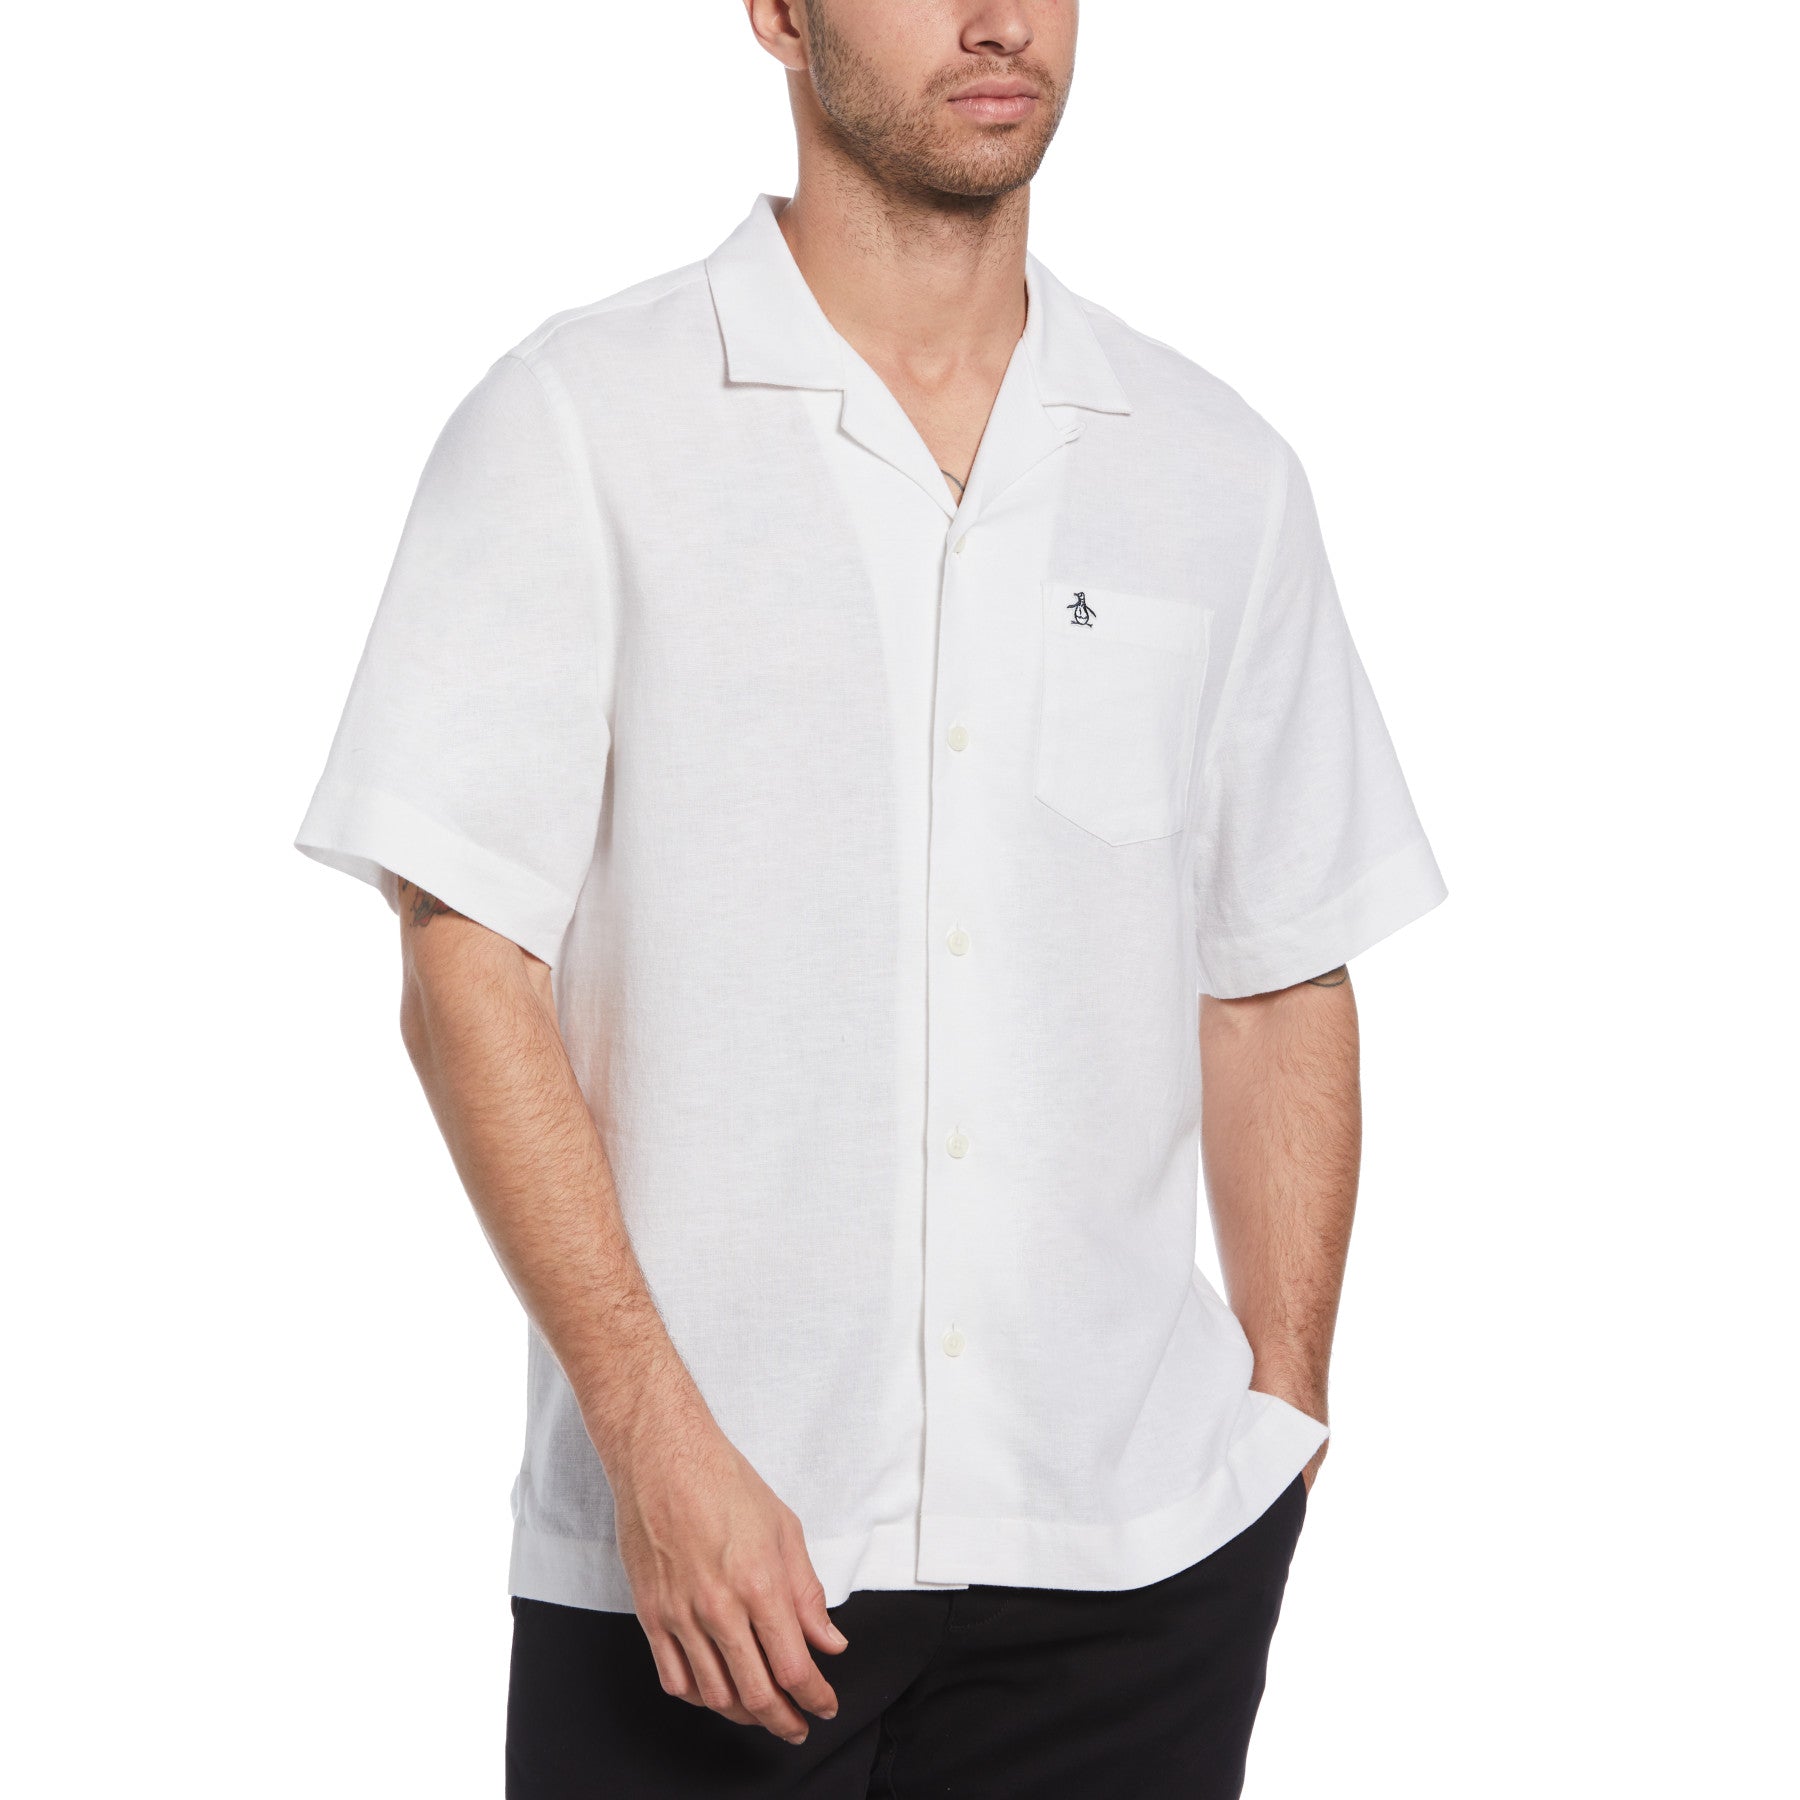 View Linen Ecovero Short Sleeve Shirt In Bright White information